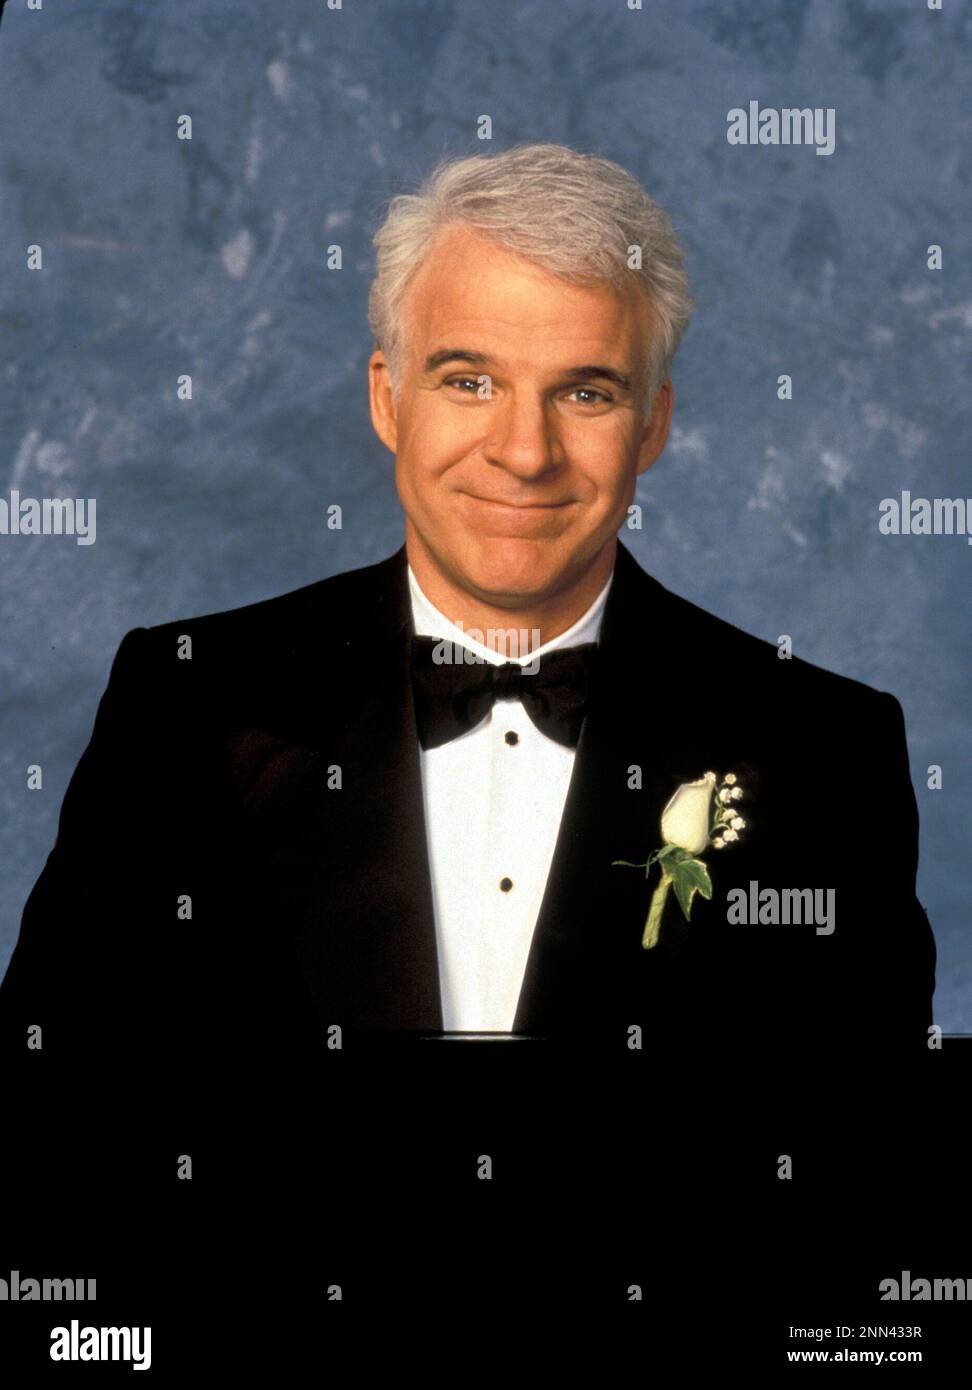 STEVE MARTIN in FATHER OF THE BRIDE (1991), directed by CHARLES SHYER